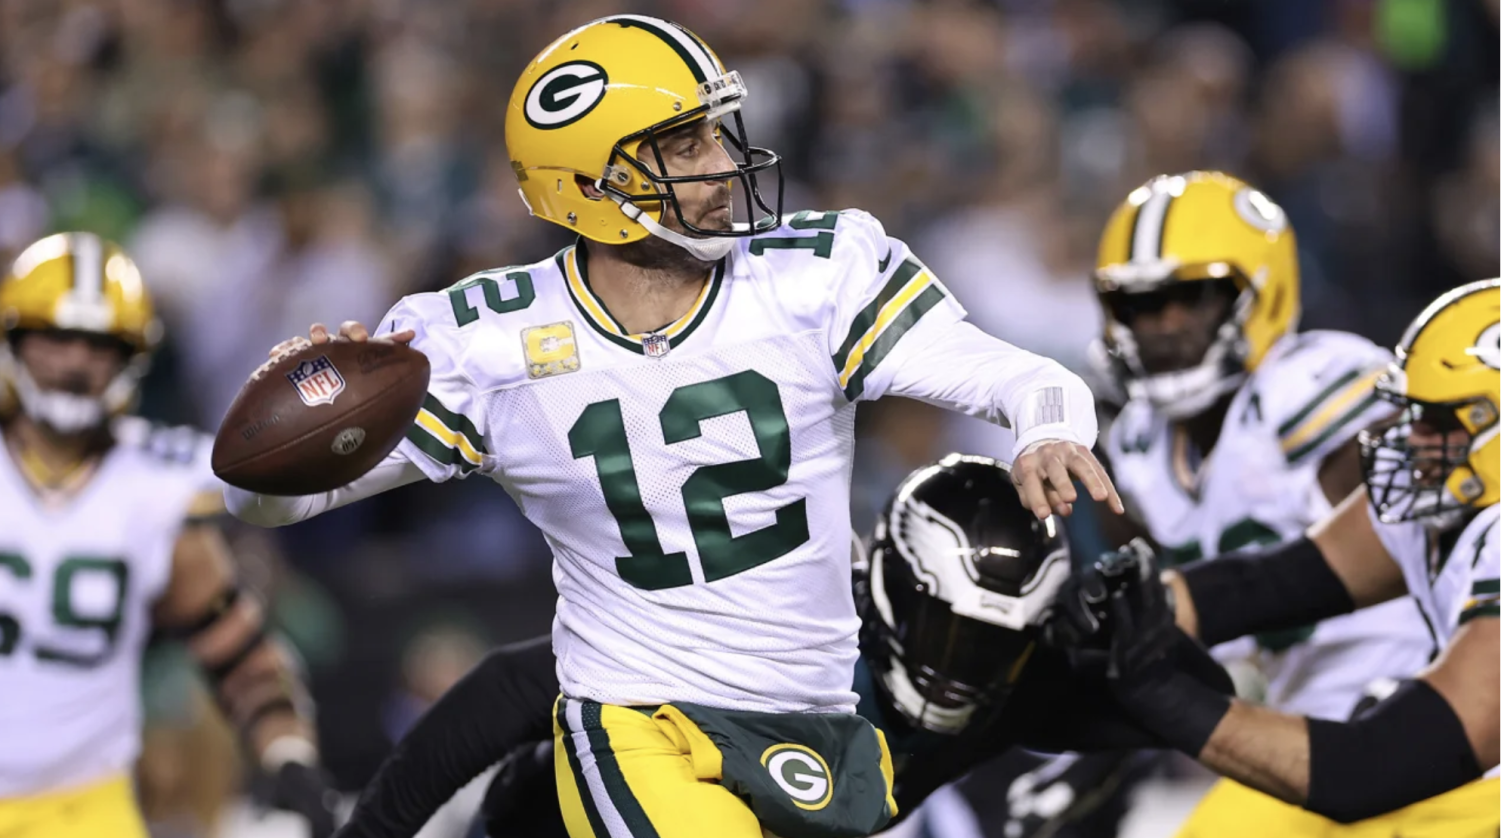 2023 NFL Draft Implications After Packers Trade Aaron Rodgers to